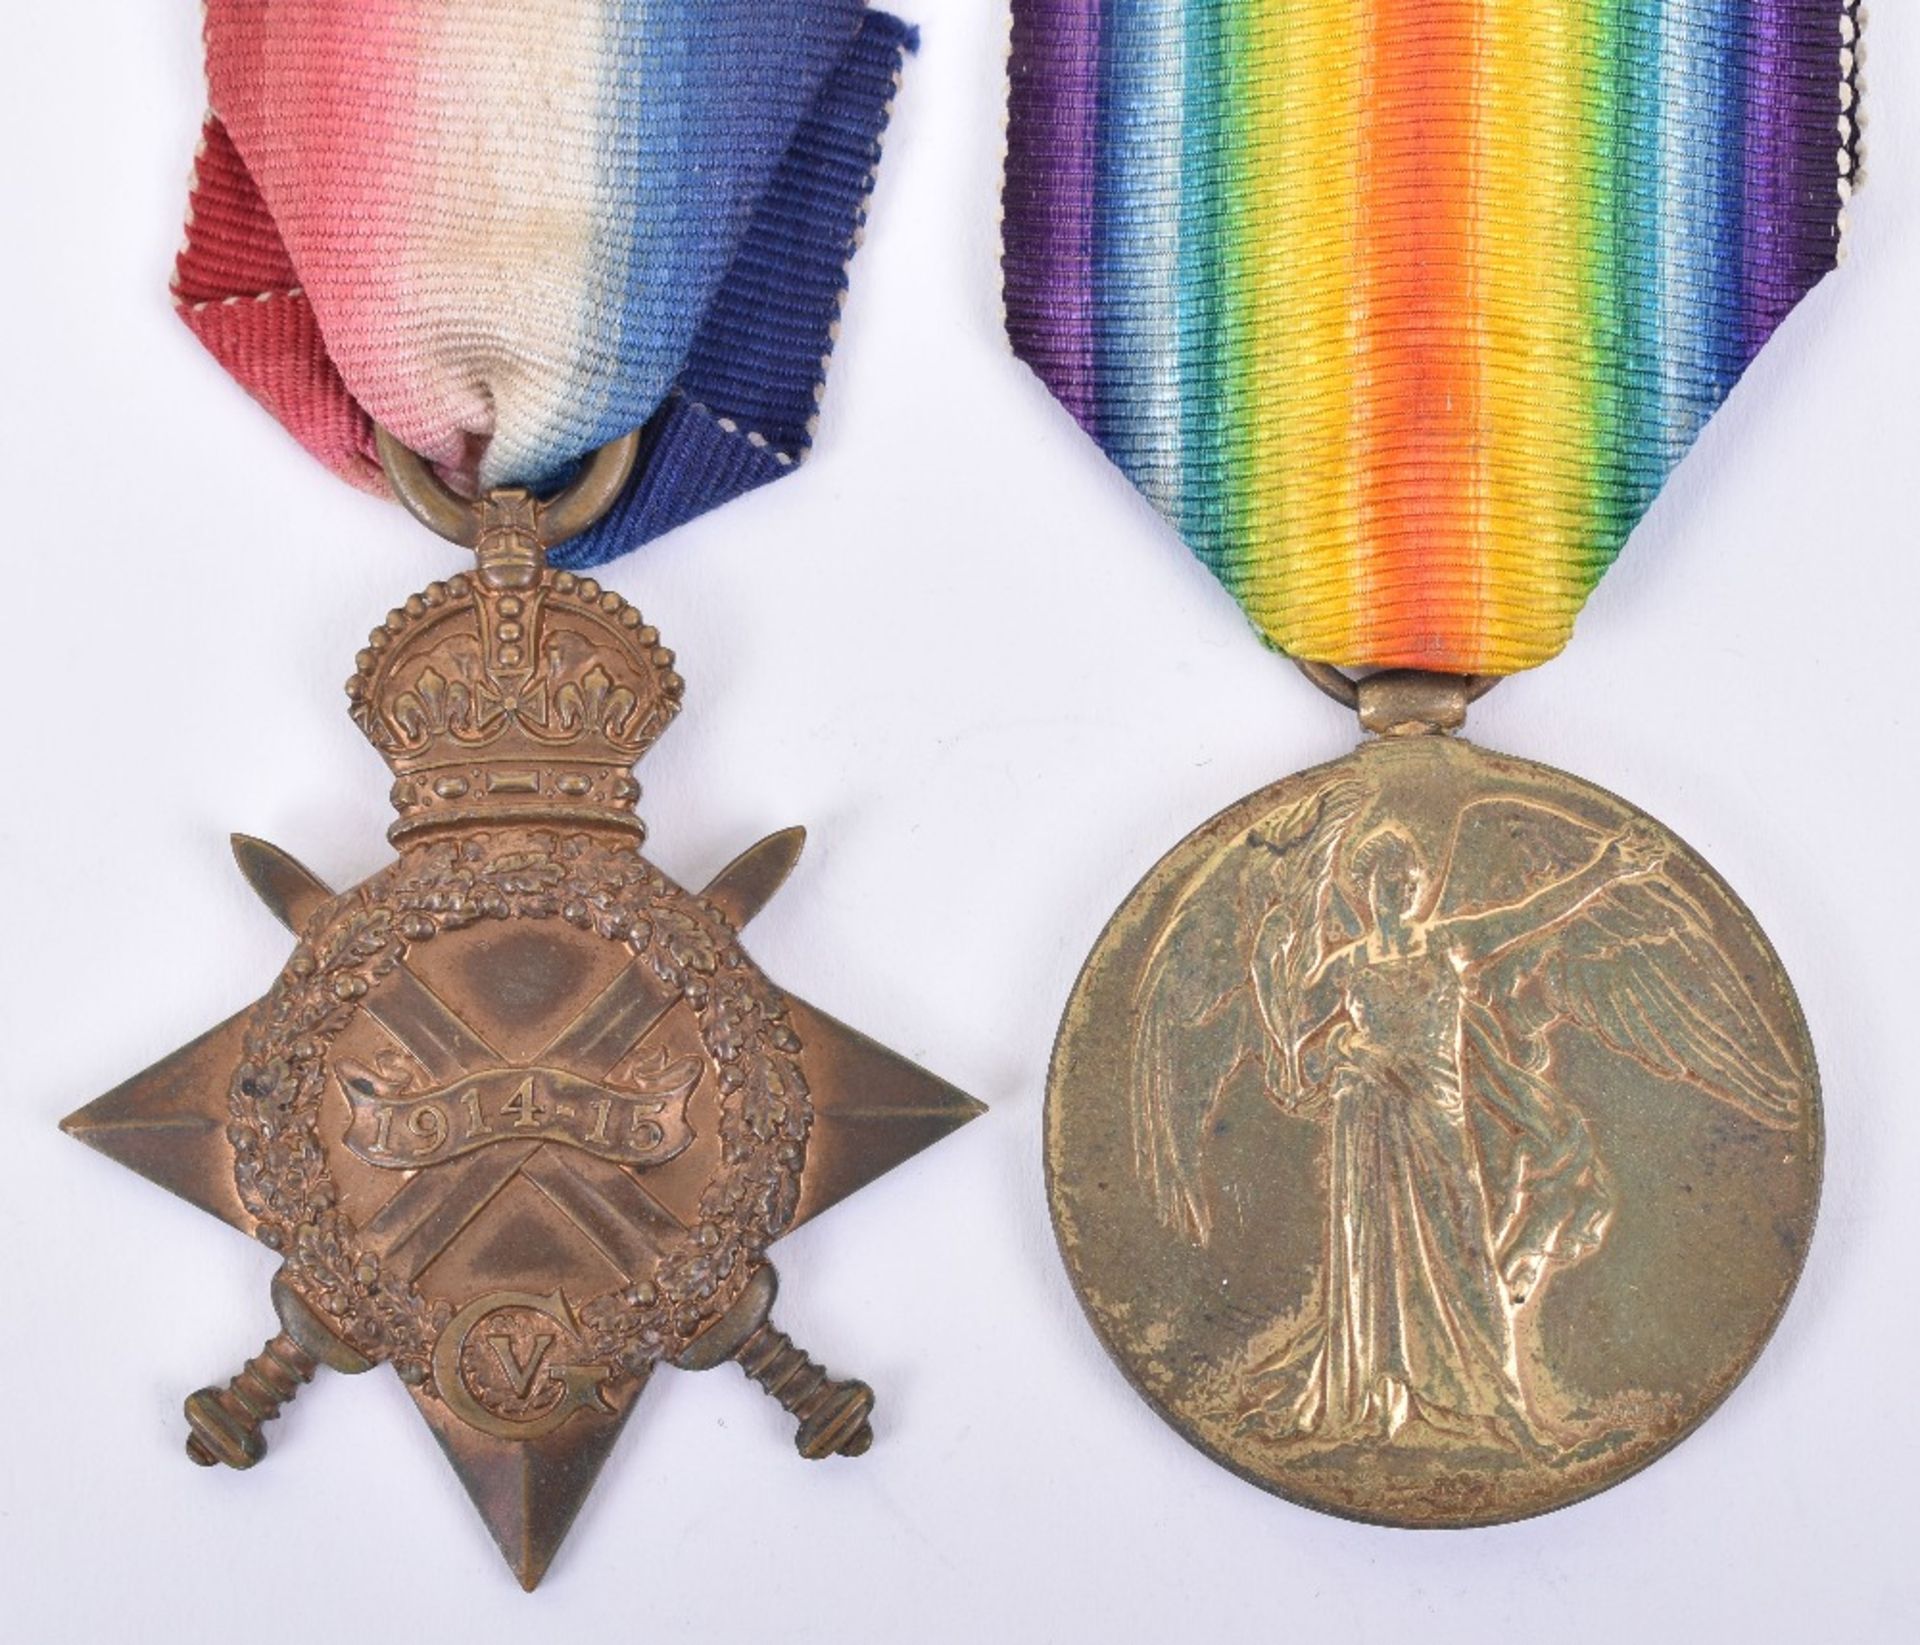 Great War Casualty Medal Pair of 2nd Lieutenant 1/12th Battalion London Regiment, late 1/10th London